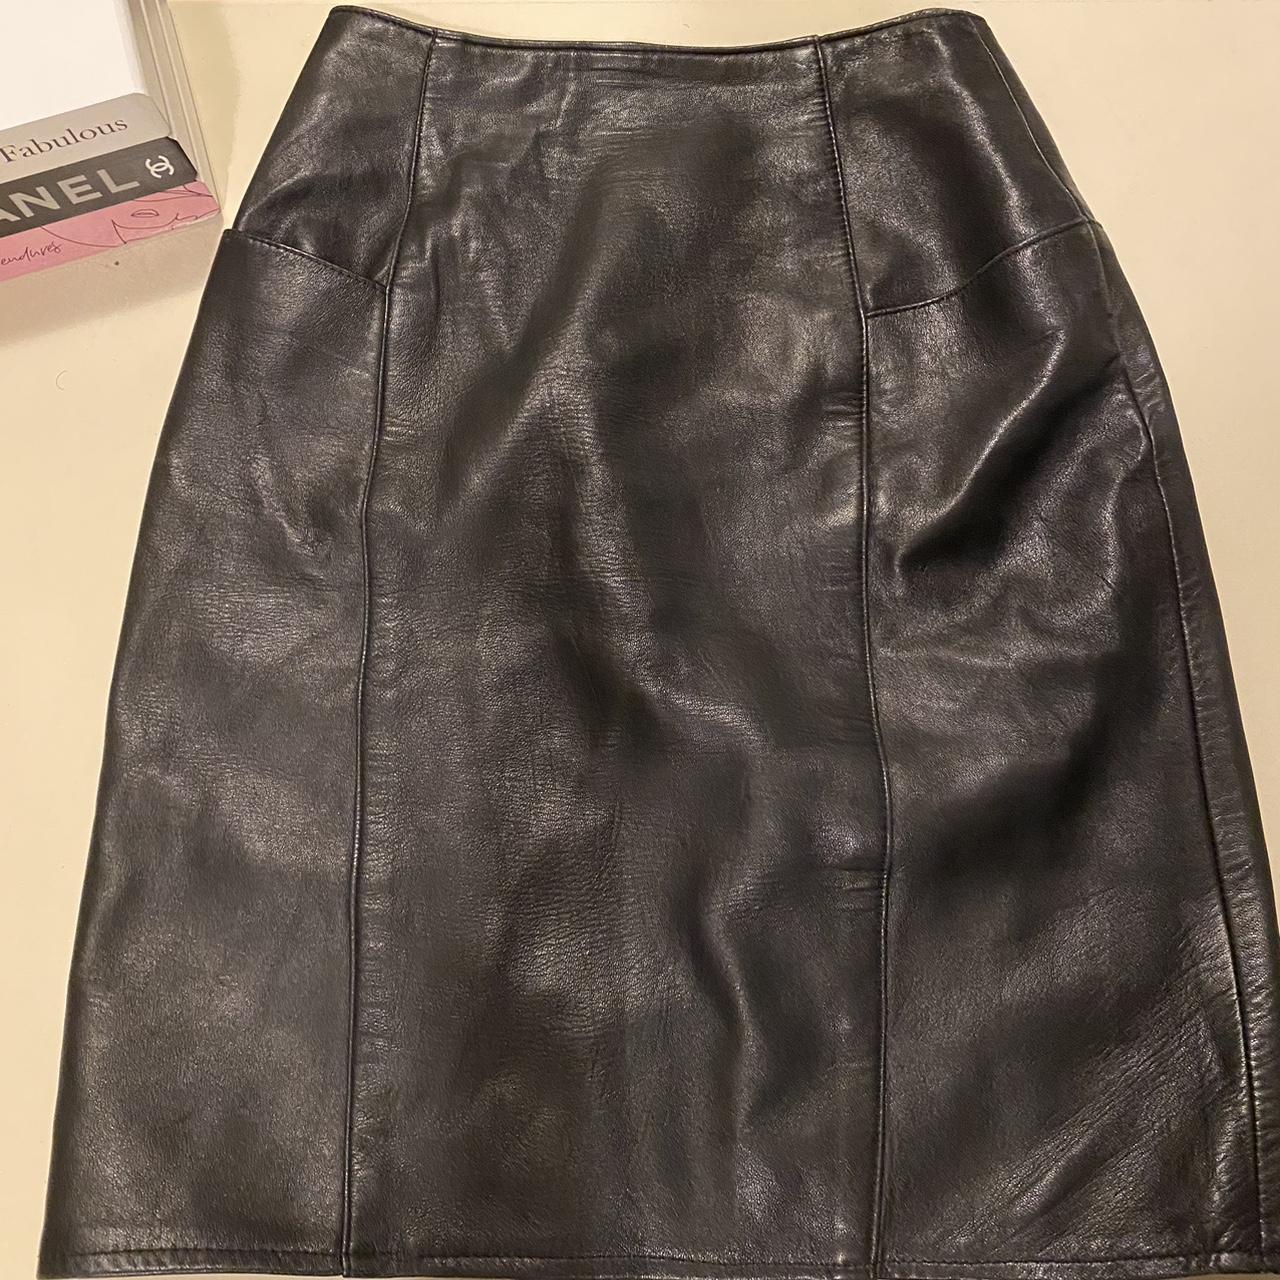 Vintage leather skirt in great condition - Depop